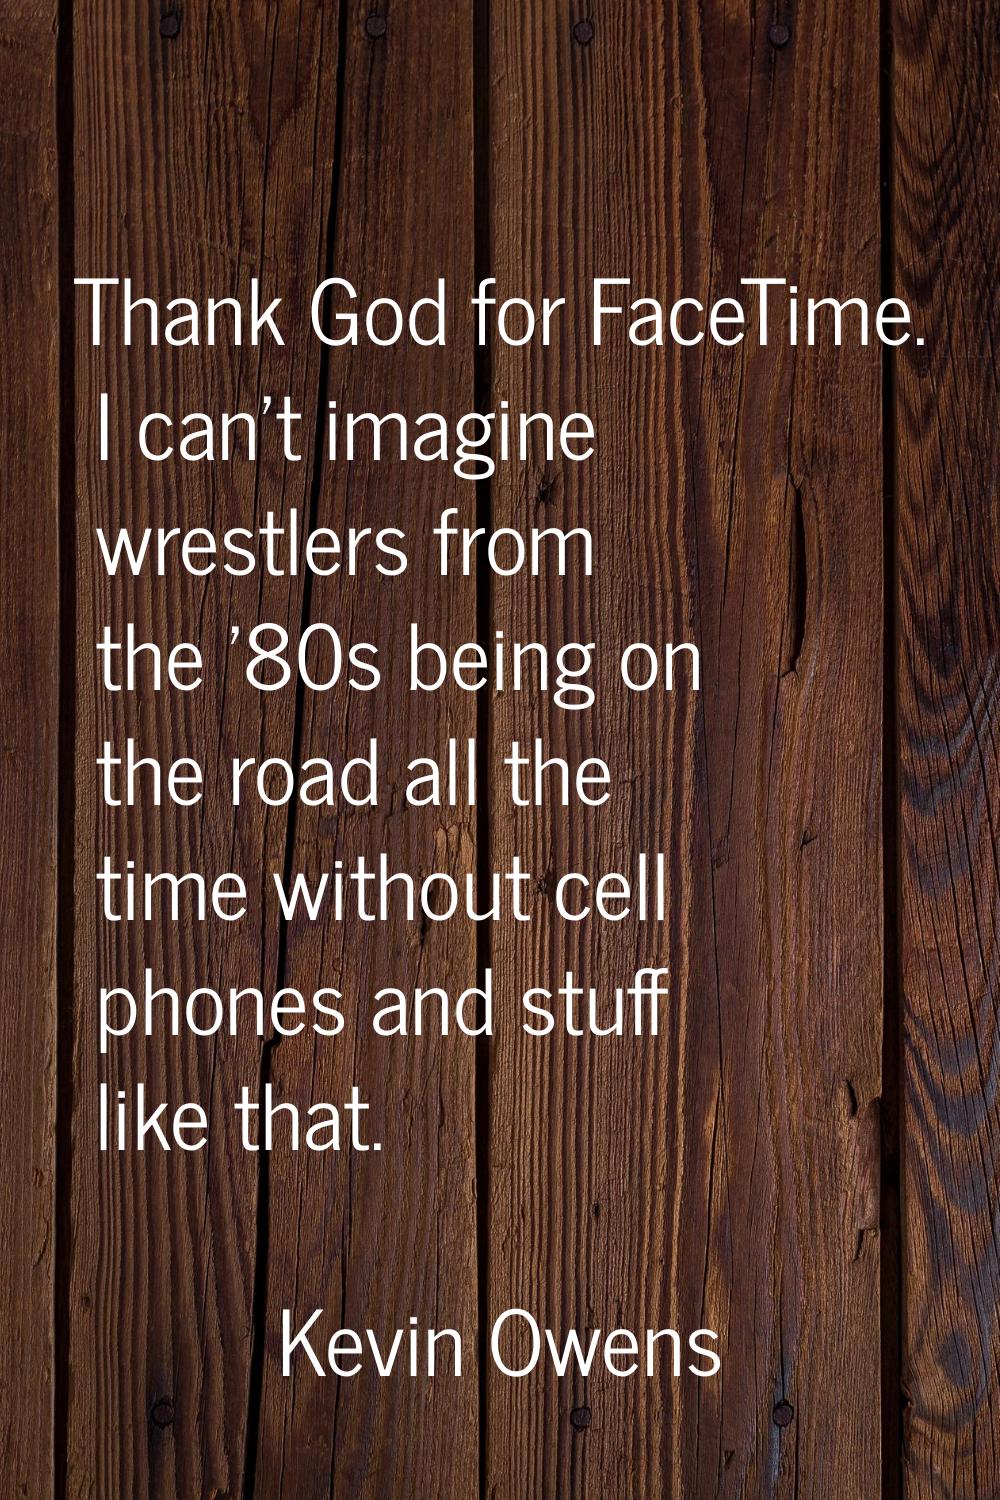 Thank God for FaceTime. I can't imagine wrestlers from the '80s being on the road all the time with